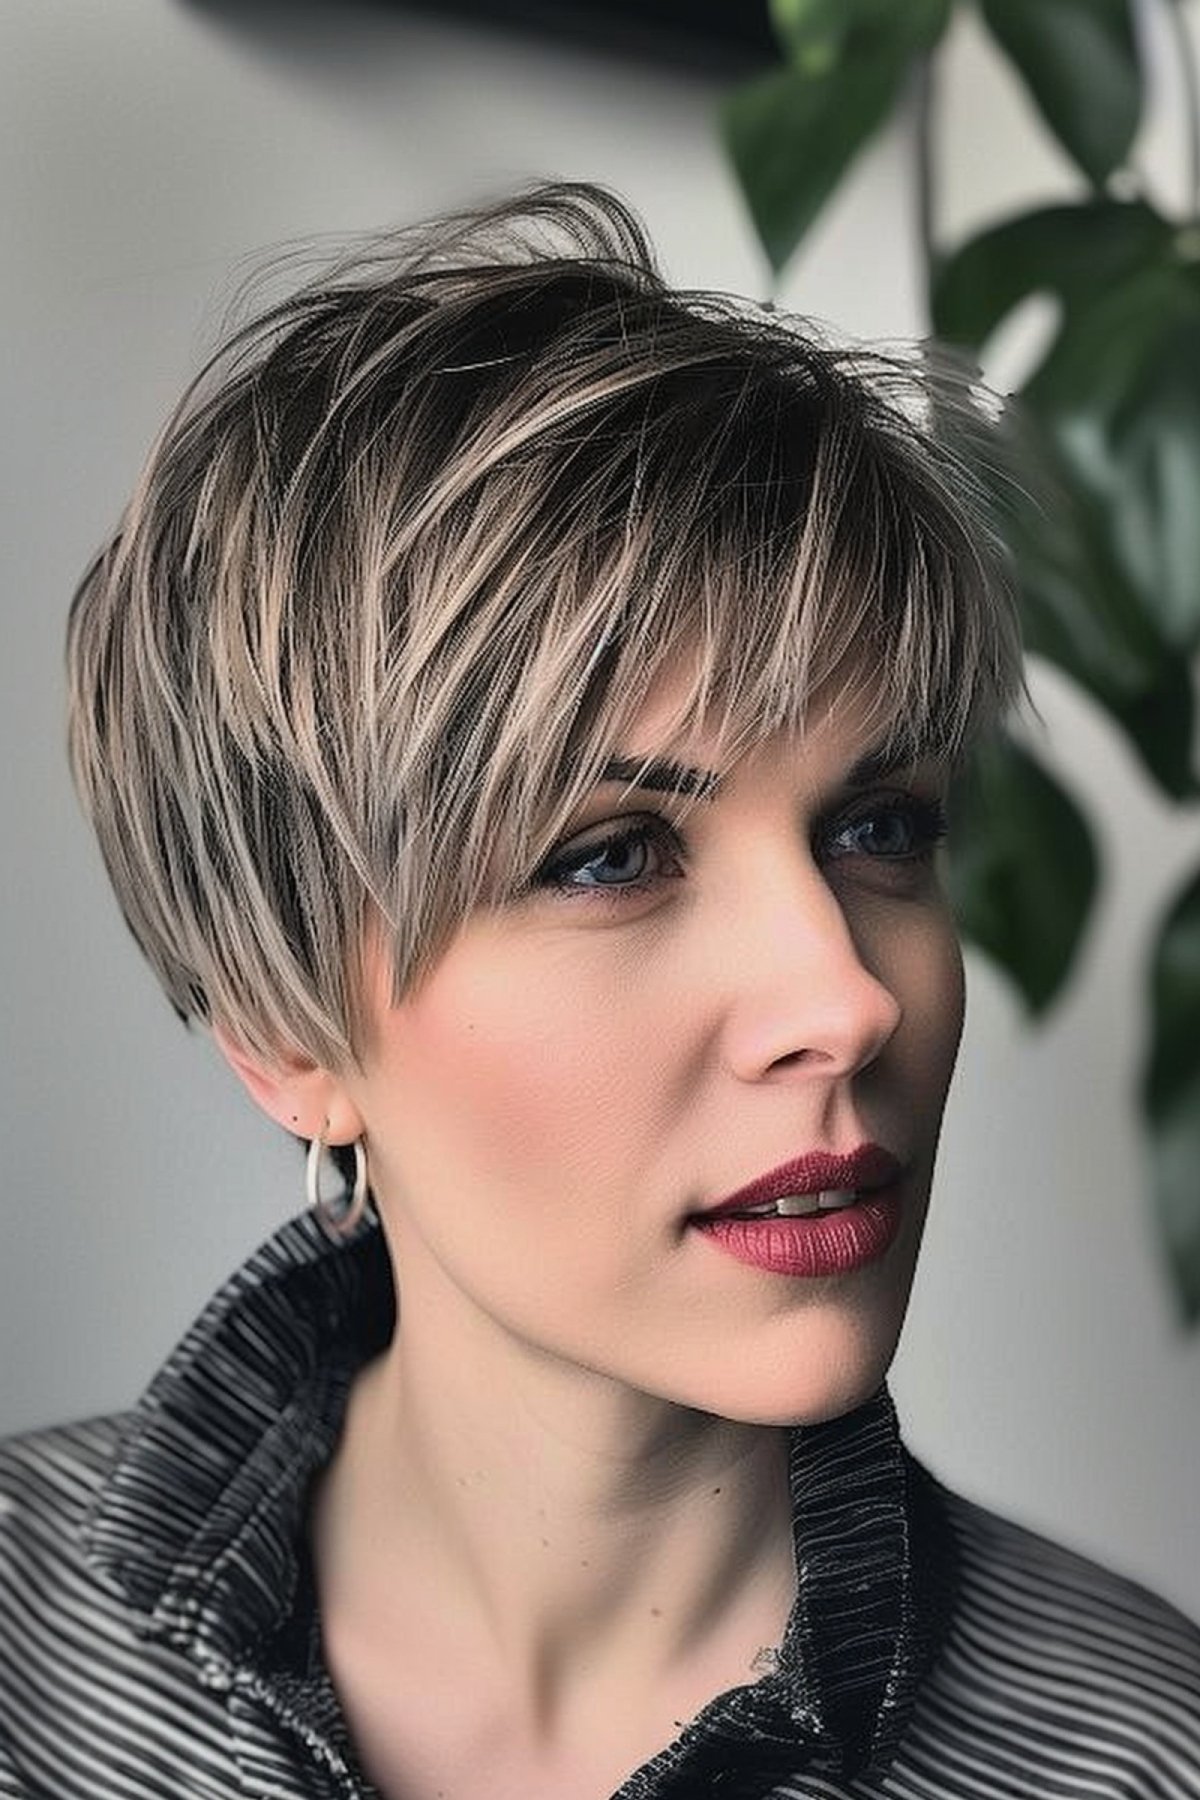 Short feathered thick pixie haircut with balayage highlights